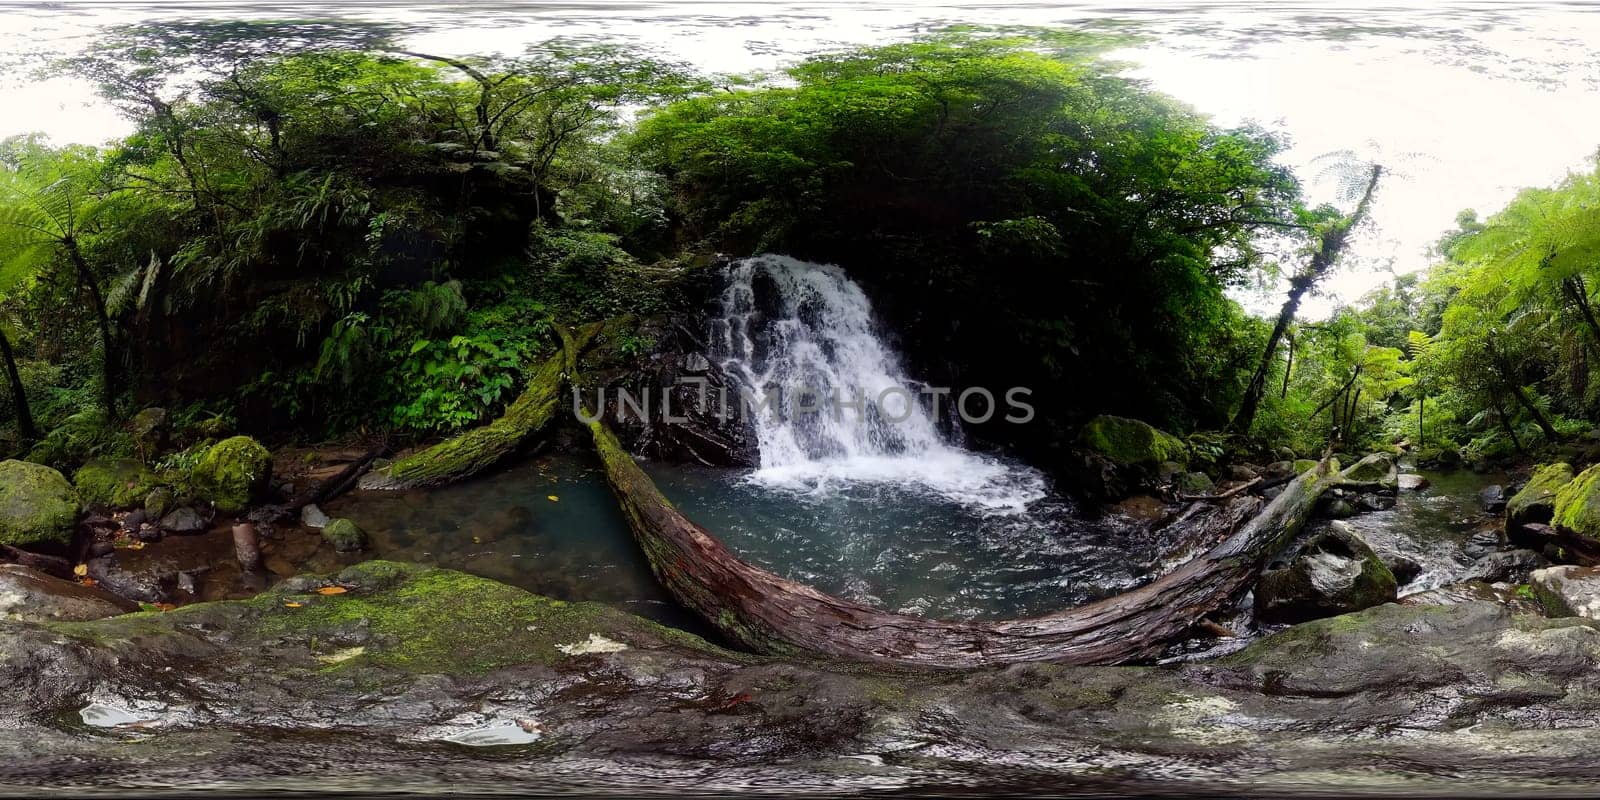 Tropical Malisbog Waterfalls in jungle.360-Degree view. by Alexpunker